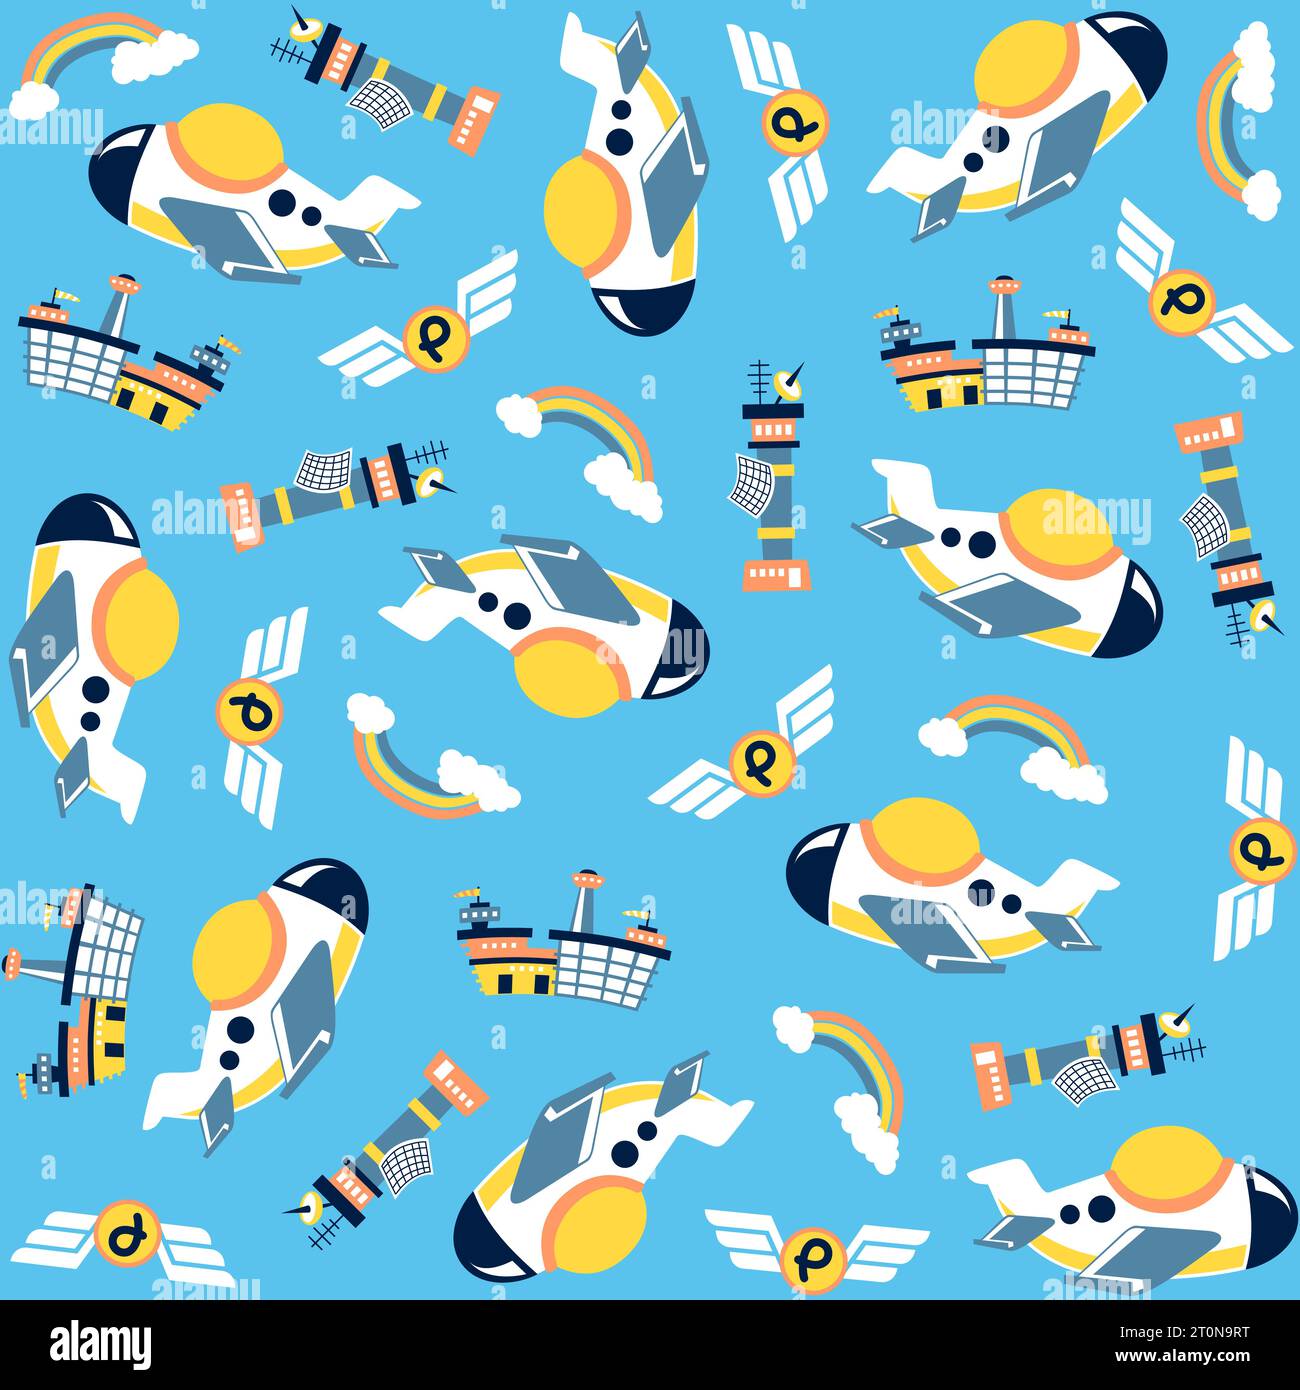 Vector cartoon seamless pattern of airplane with air transport elements Stock Vector